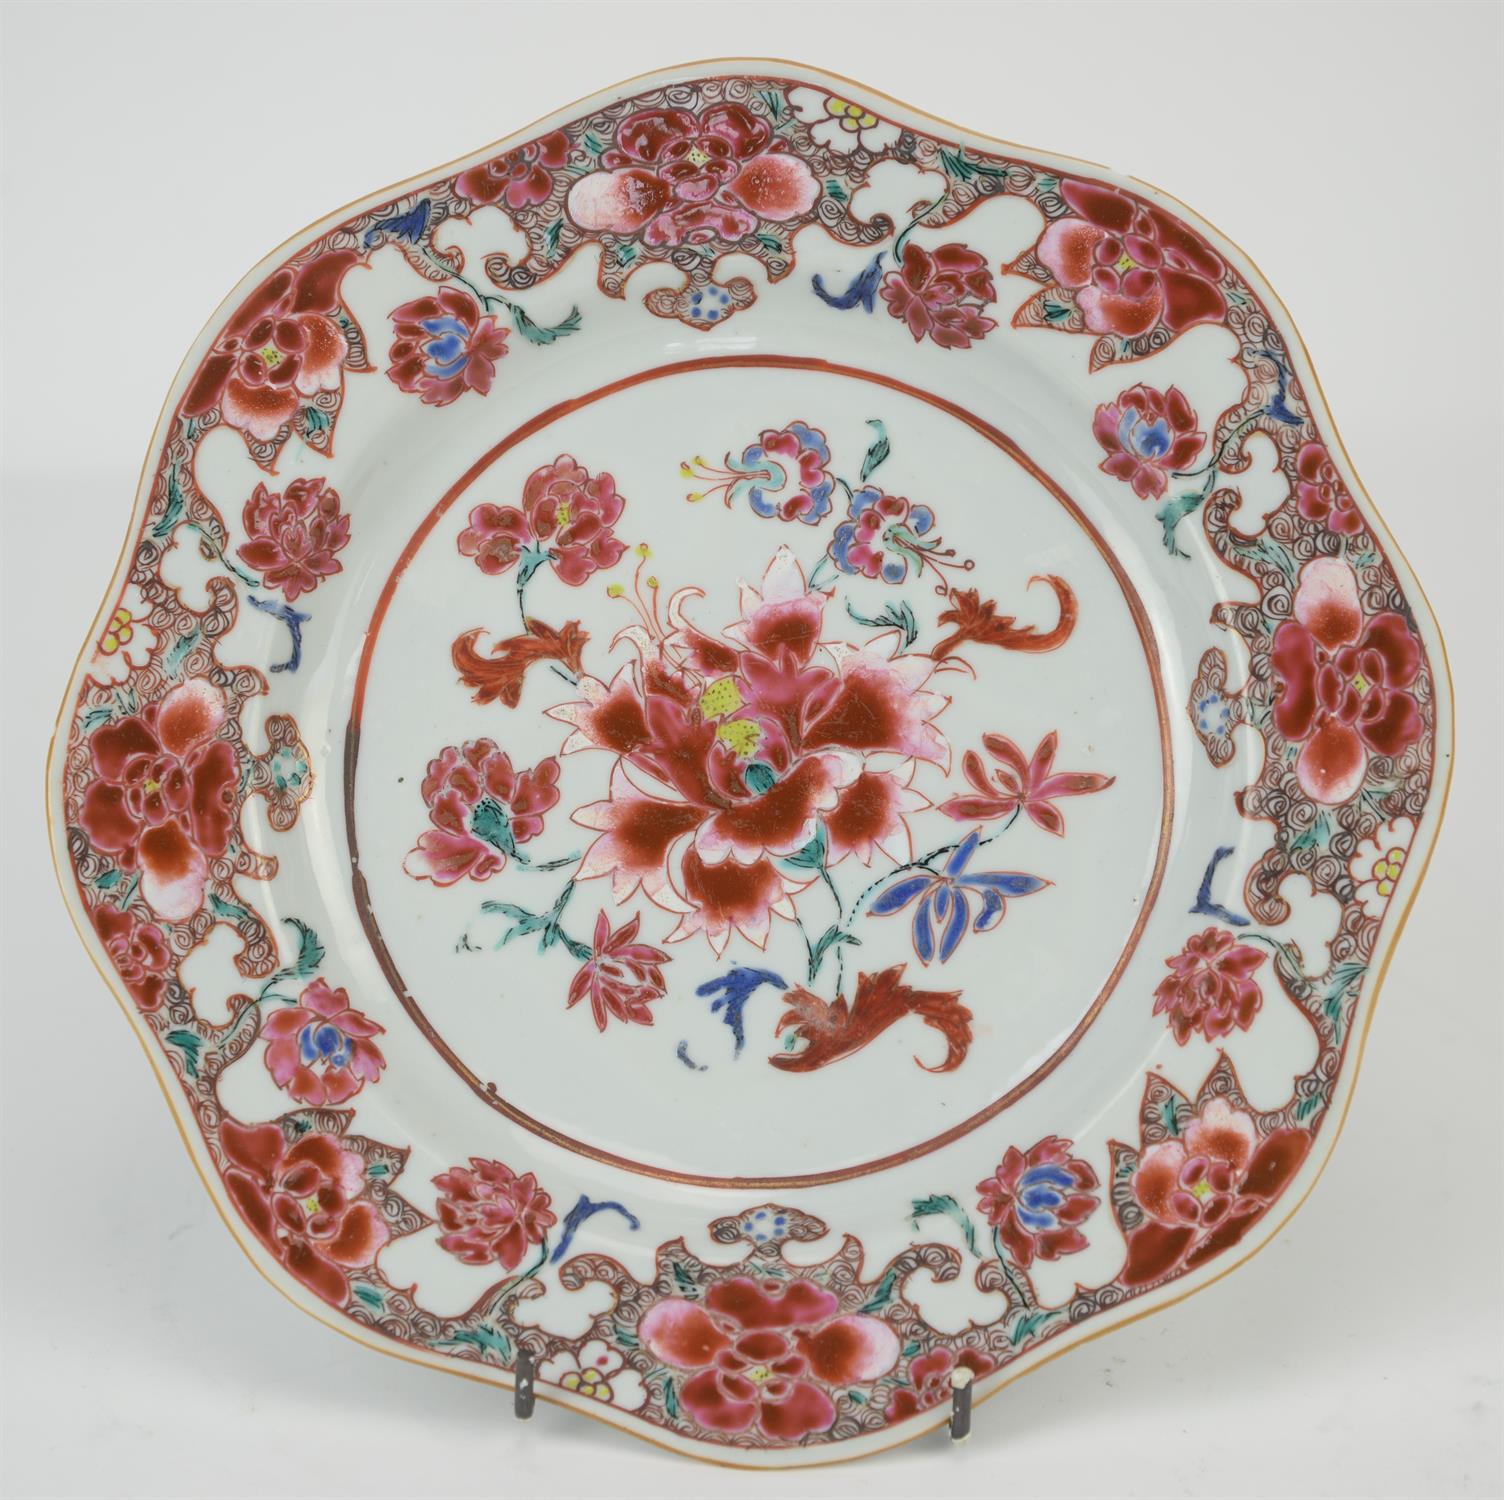 Eight famille rose dishes; each one decorated with floral designs and about 22.5 cm diameter - Image 9 of 14